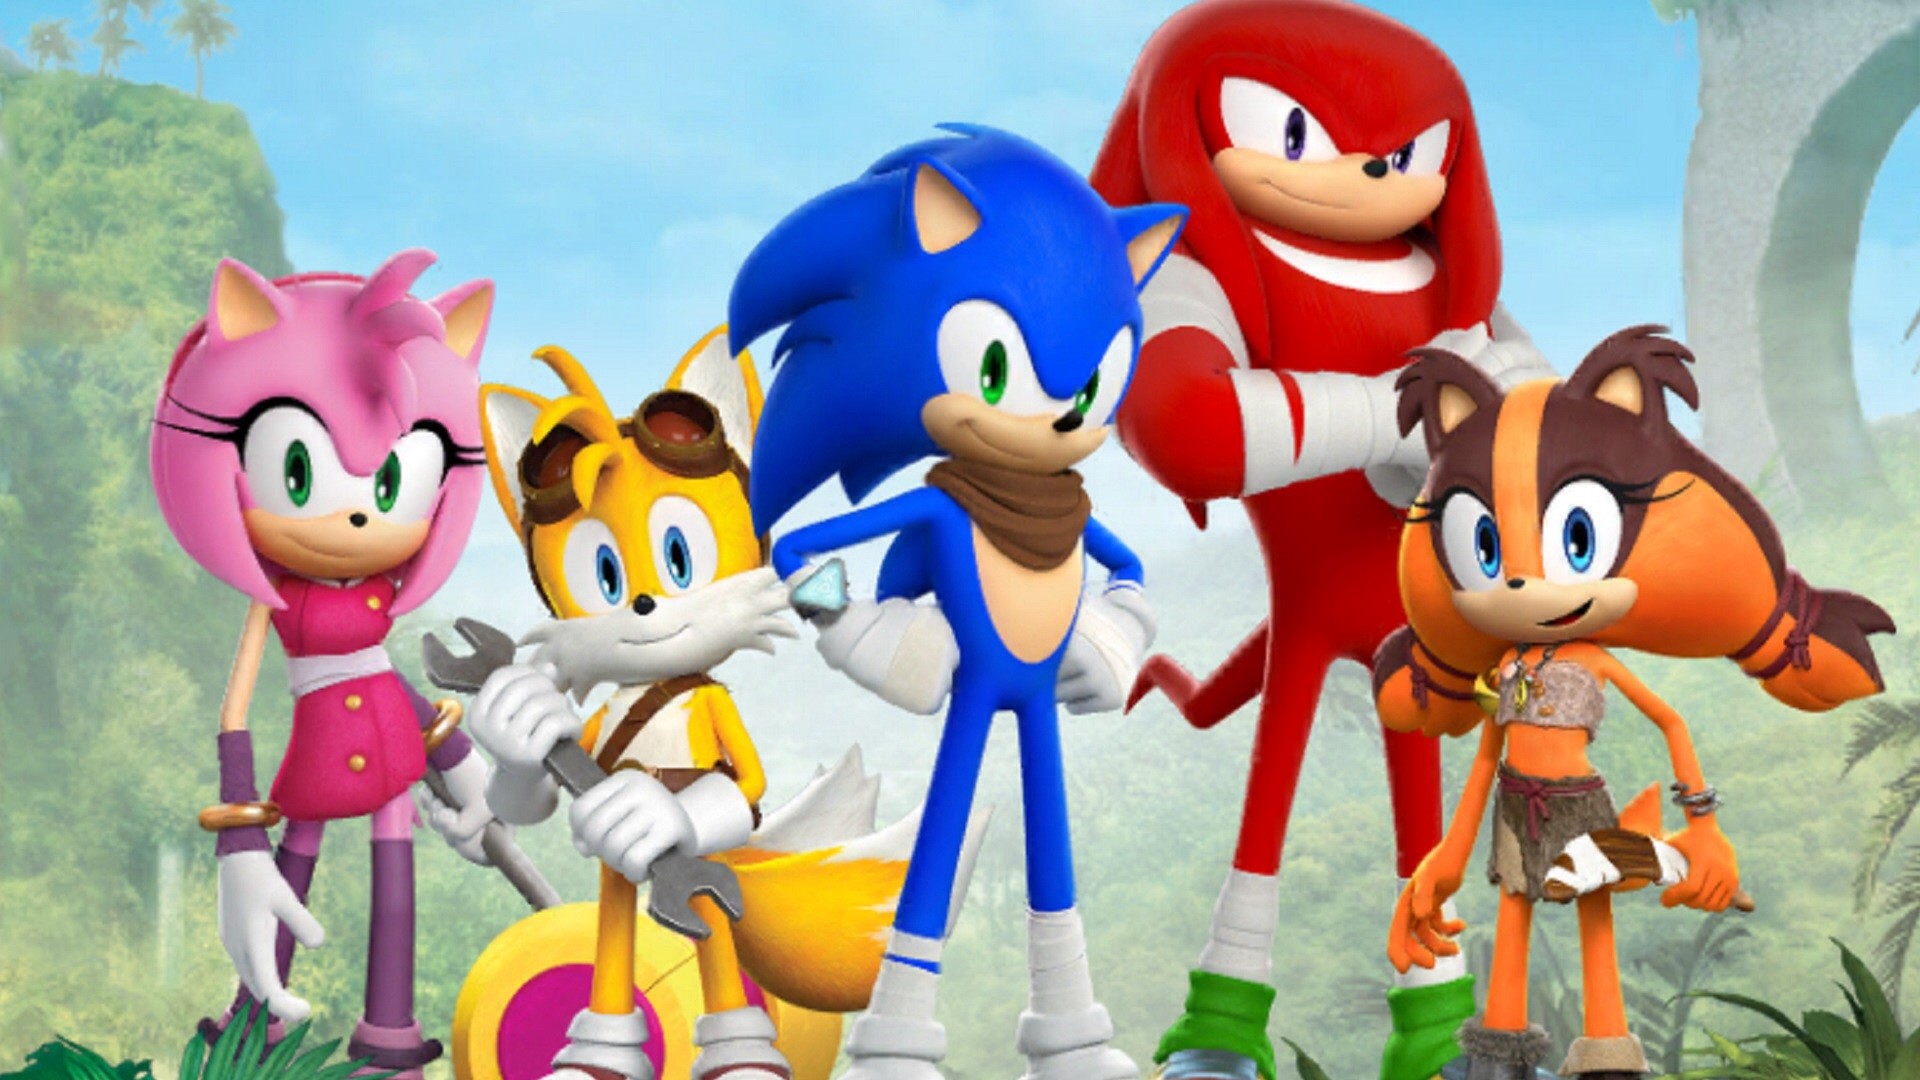 sonic boom wallpapers wallpaper cave on sonic boom wallpapers